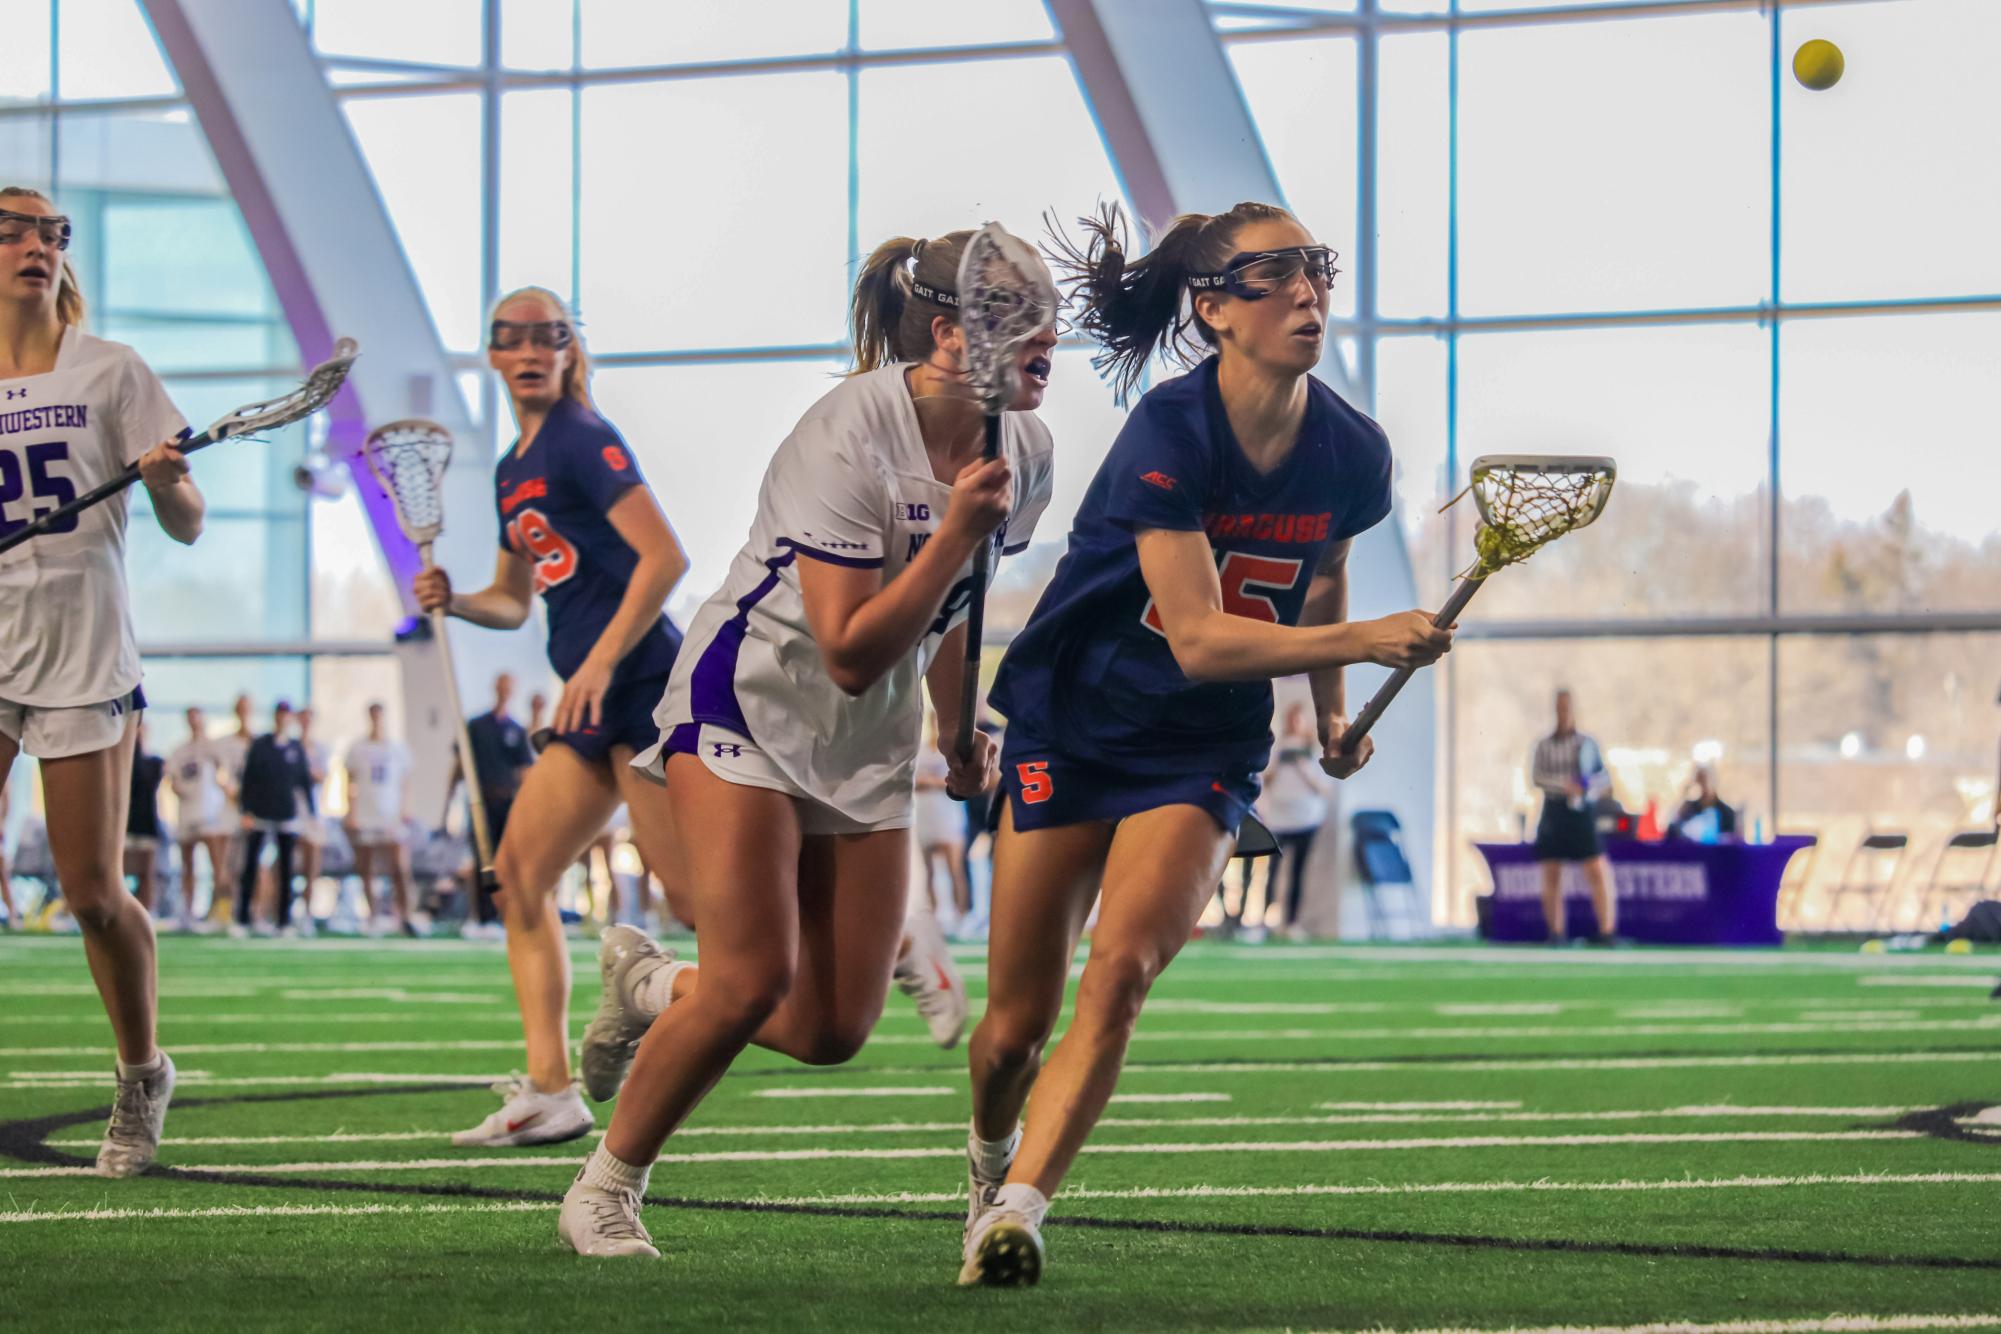 A lacrosse player in a white and purple uniform and another in a blue and orange uniform run with lacrosse sticks as they chase a yellow ball in the air.